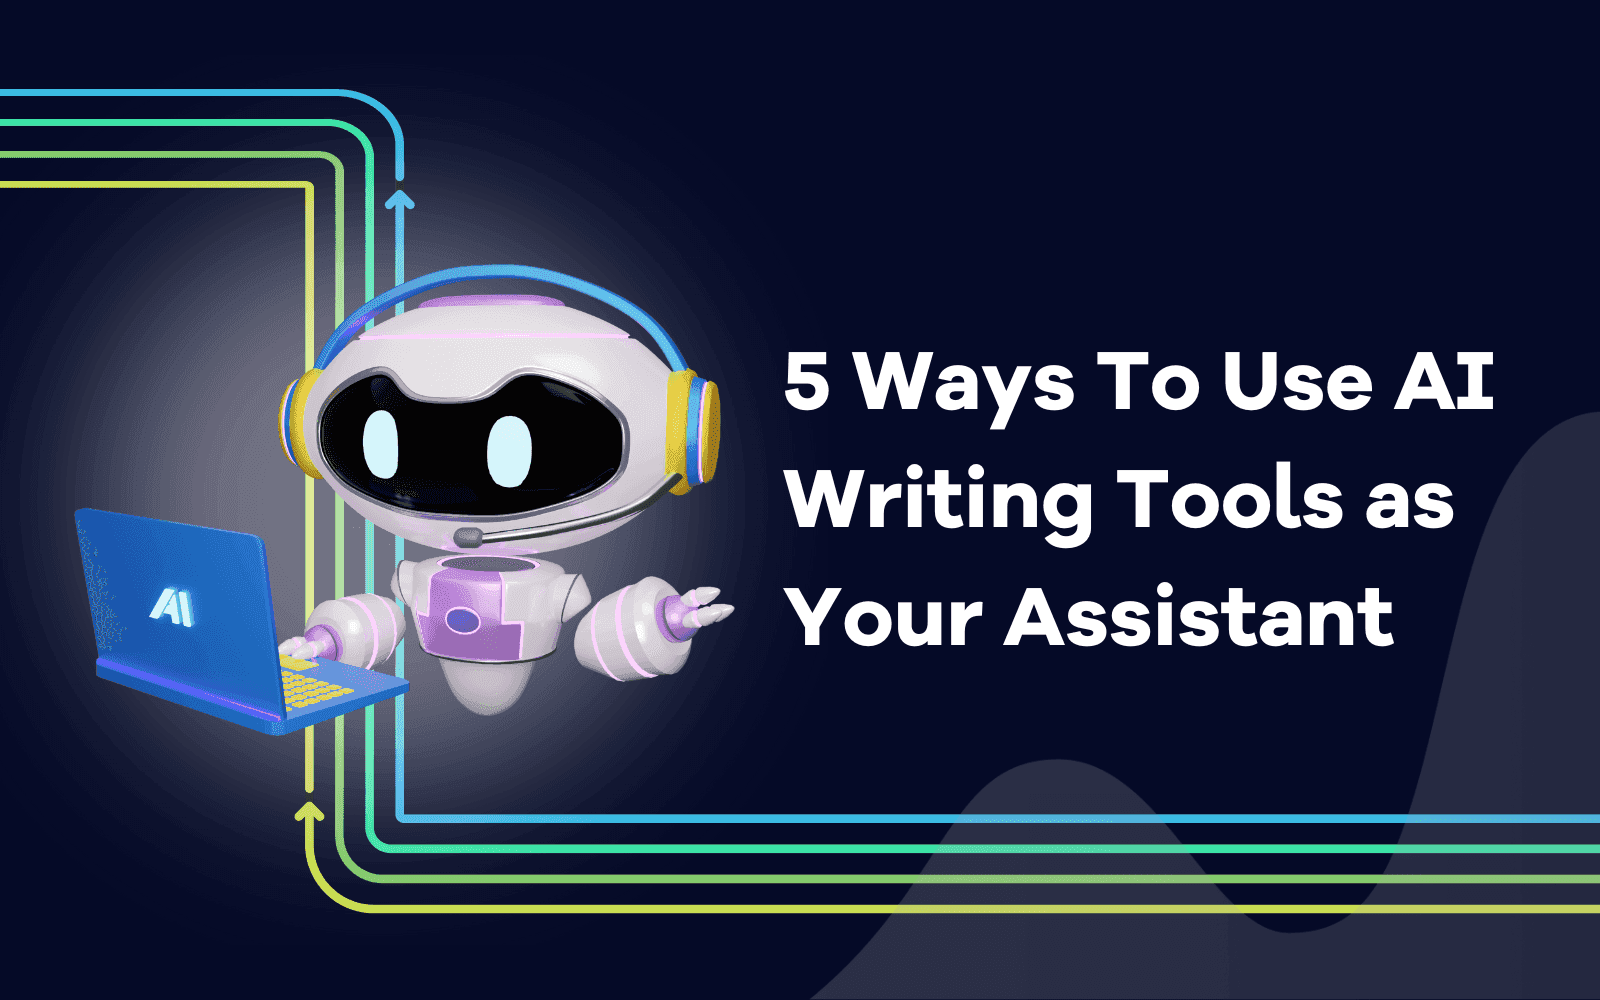 Ways To Use AI Writing Tools as Your Assistant